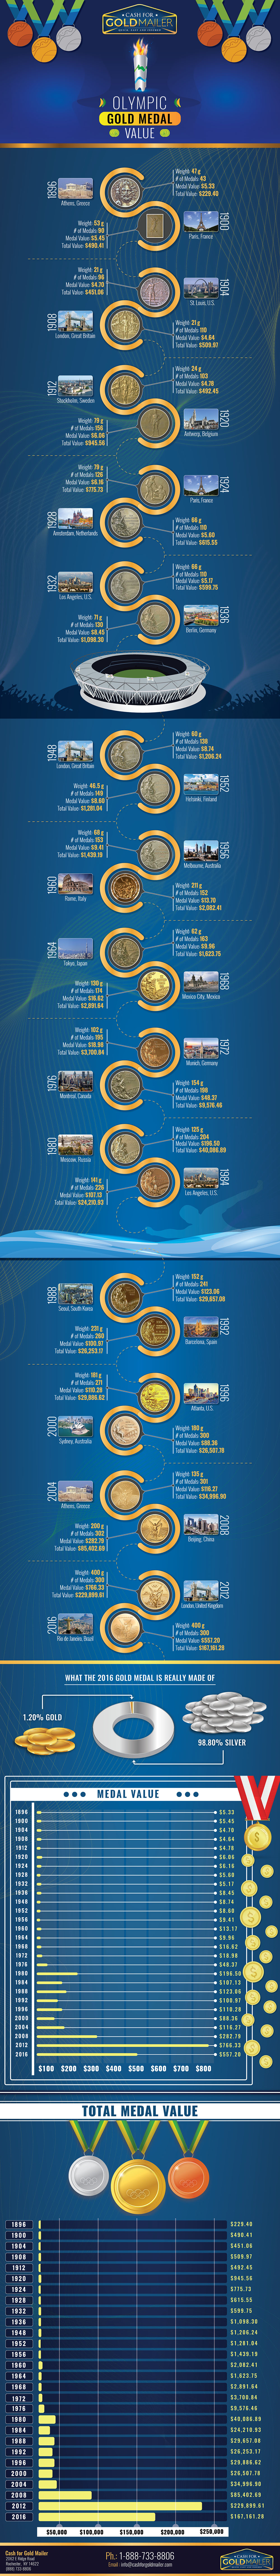 Value of Gold Medals Infographic